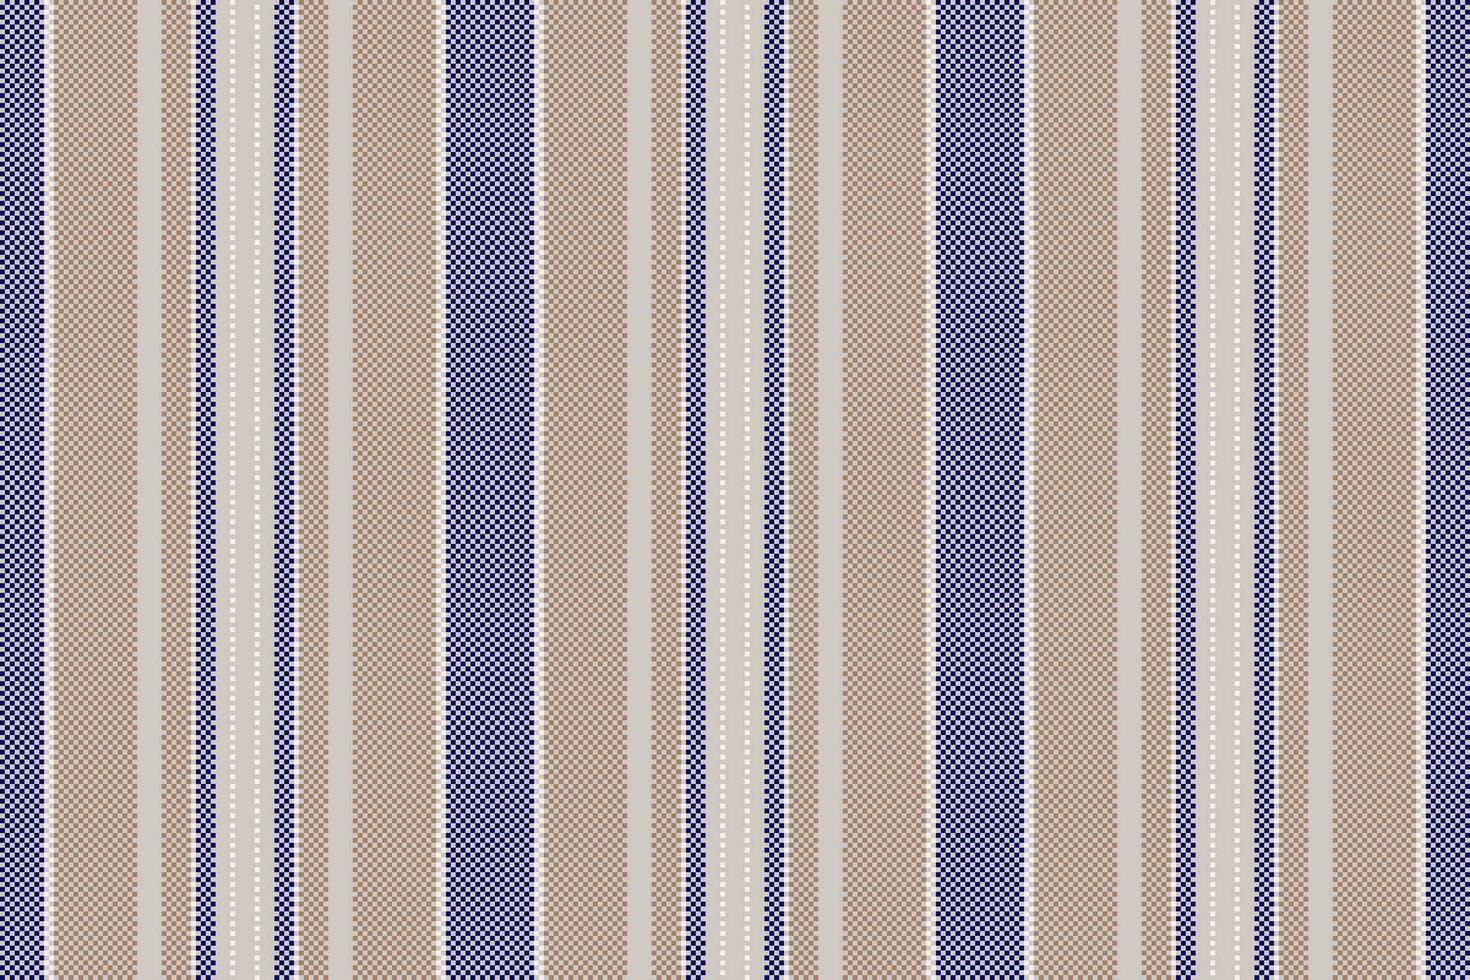 Fabric lines textile of background pattern stripe with a vertical vector seamless texture.